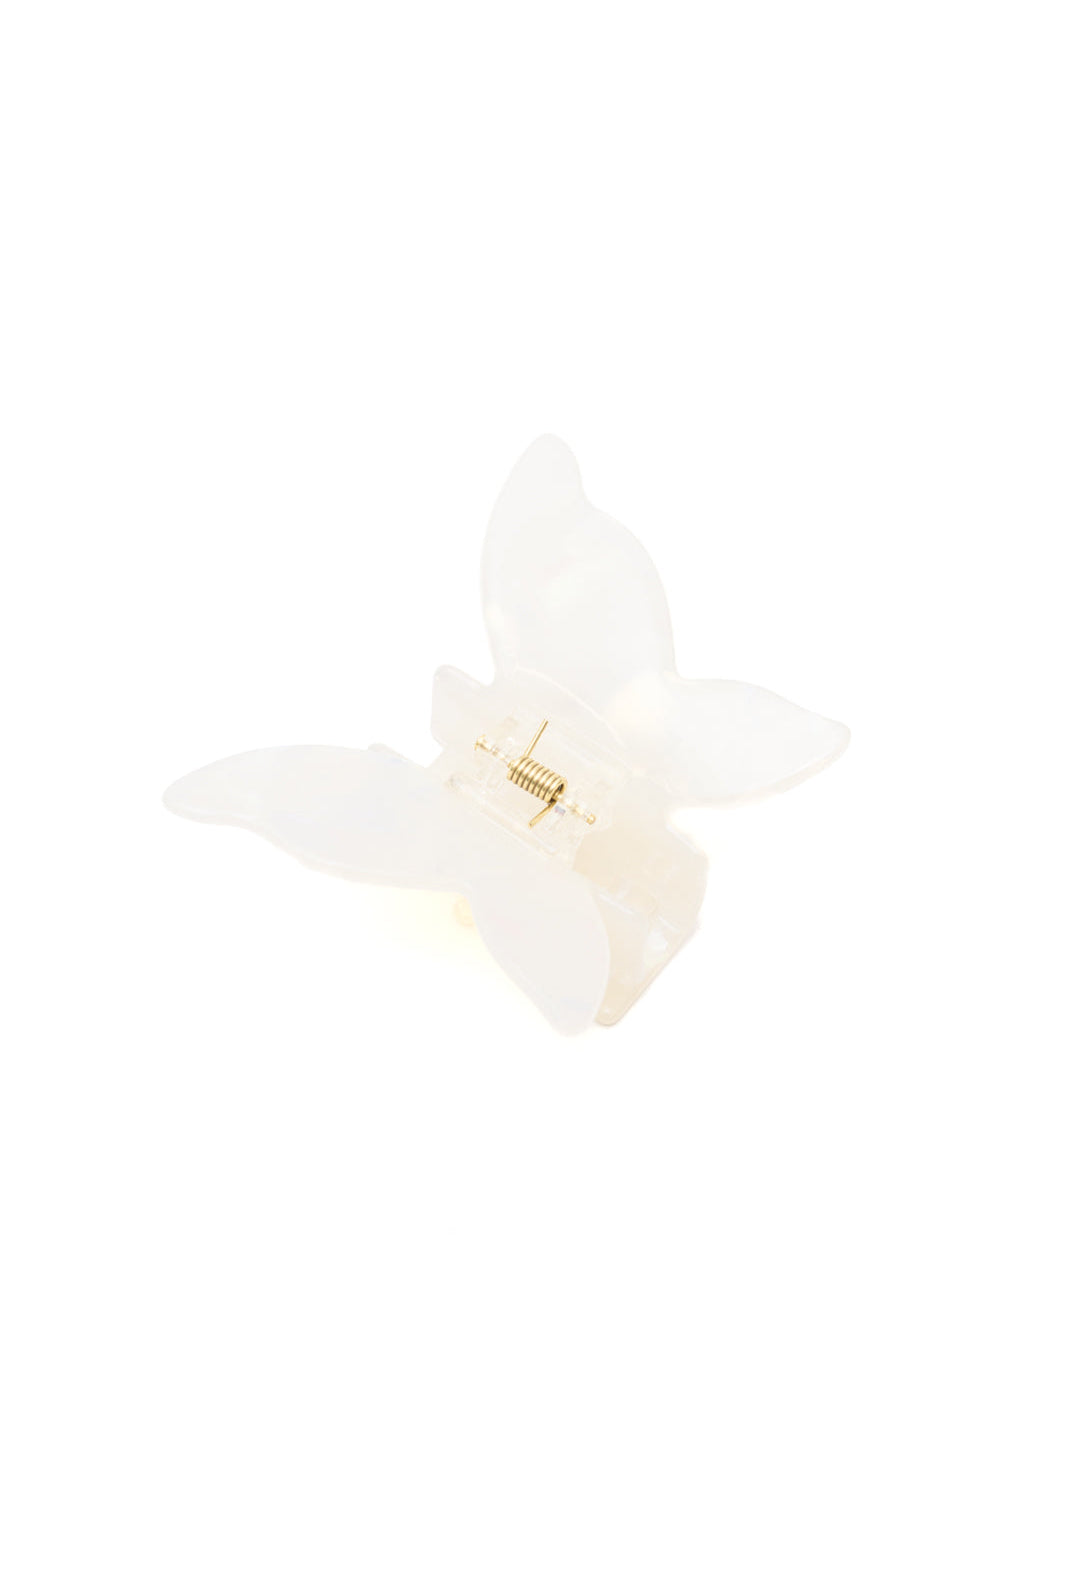 Pearl Butterfly Claw Clip in Ivory-Hair Accessories-Krush Kandy, Women's Online Fashion Boutique Located in Phoenix, Arizona (Scottsdale Area)